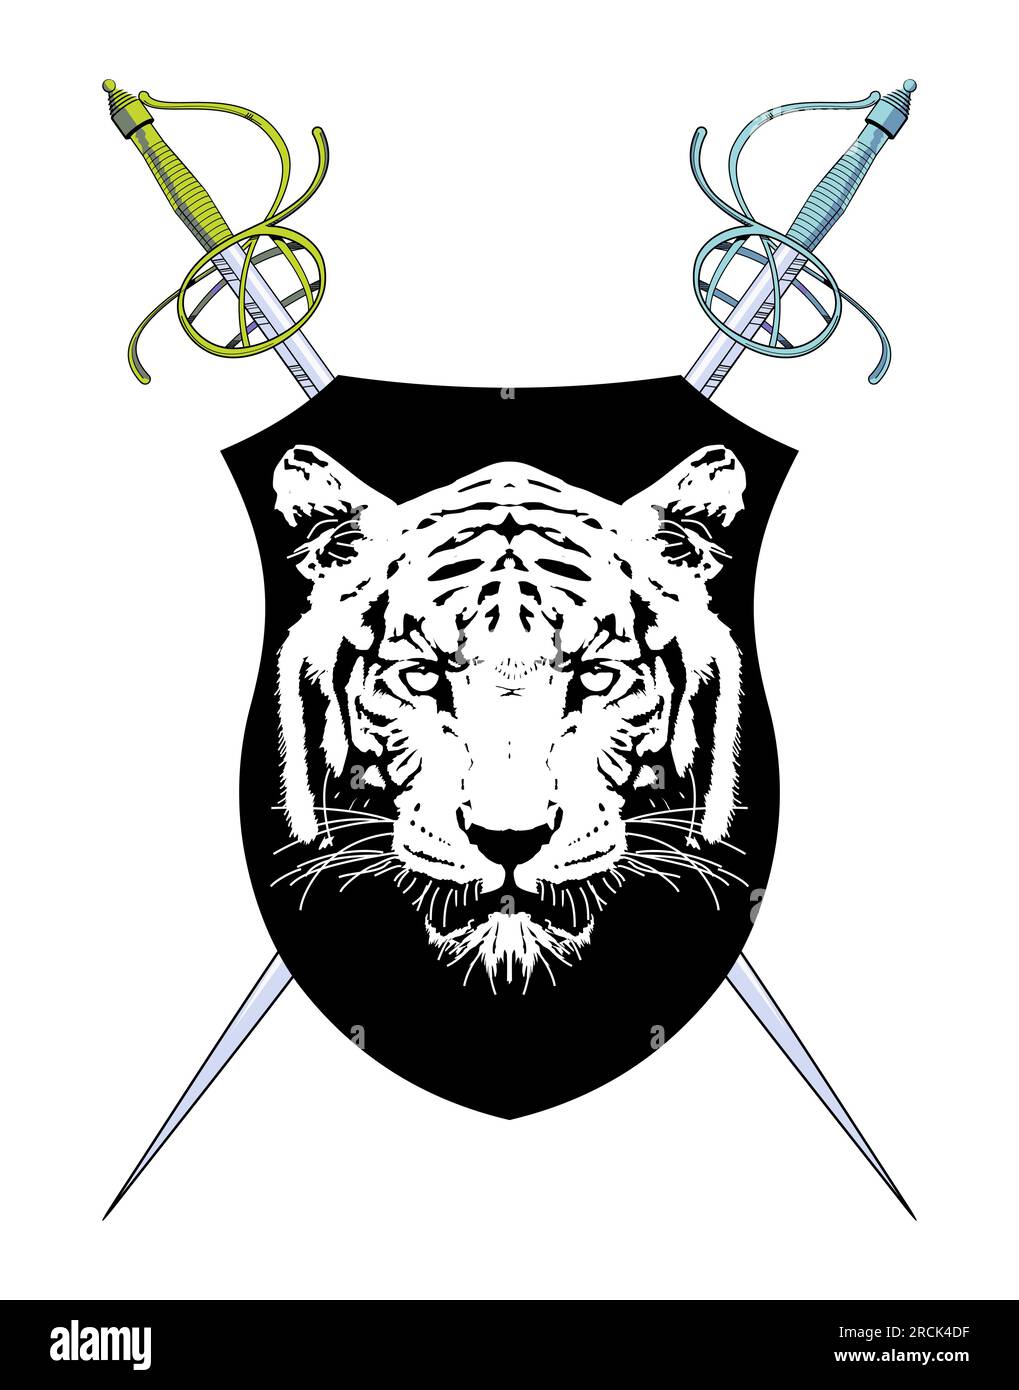 T-shirt design of a medieval shield with a tiger head. Vector illustration of heraldic themes Stock Vector